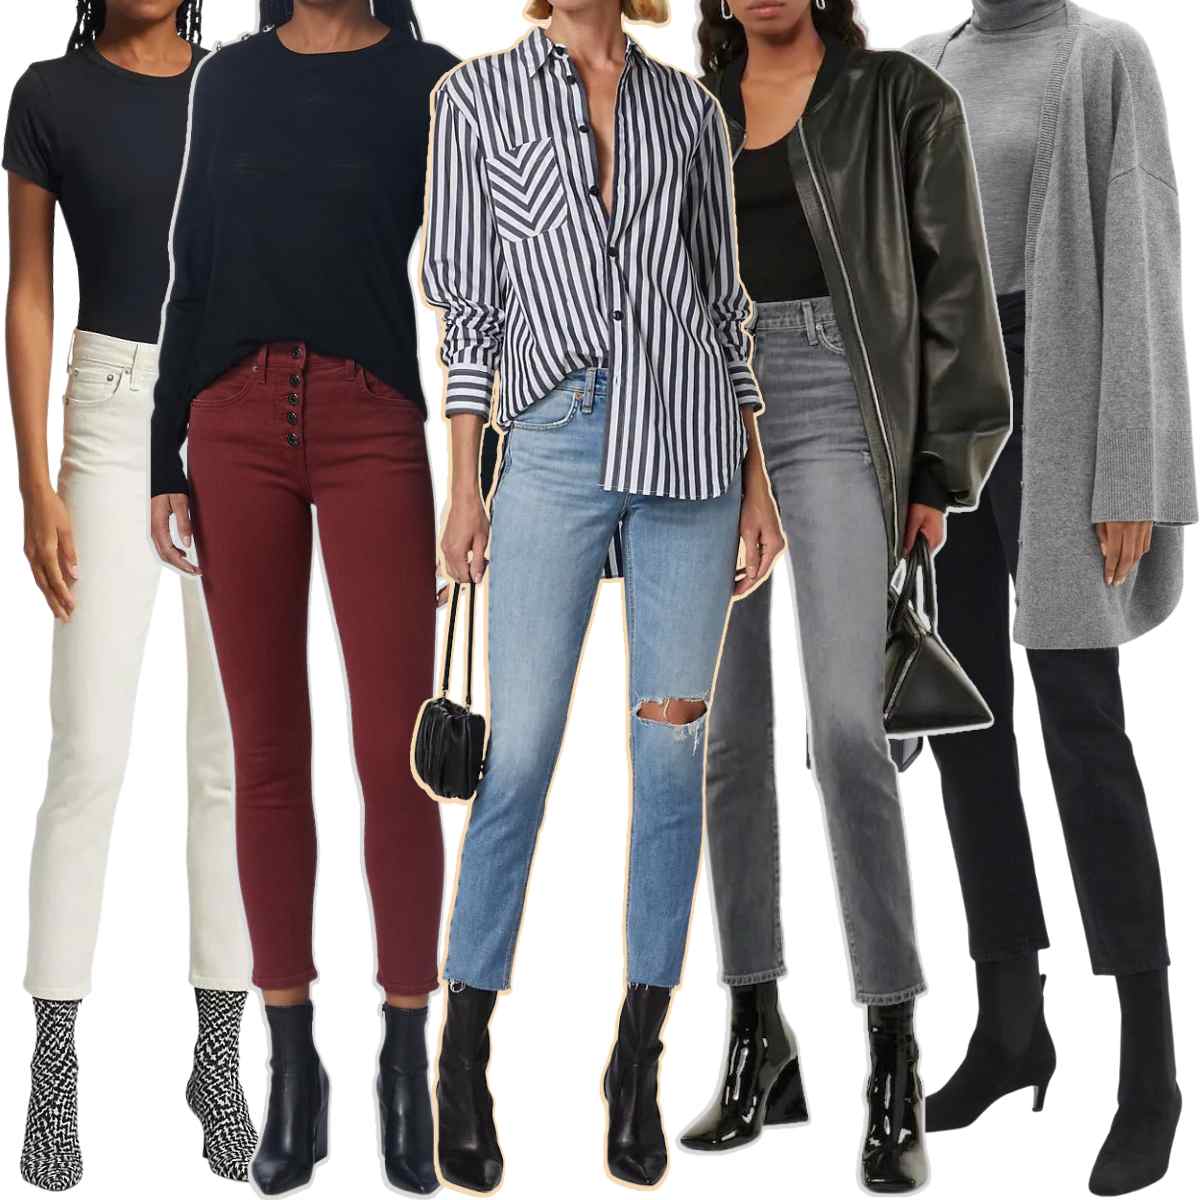 Collage of 5 women wearing different sock boots with skinny jeans.